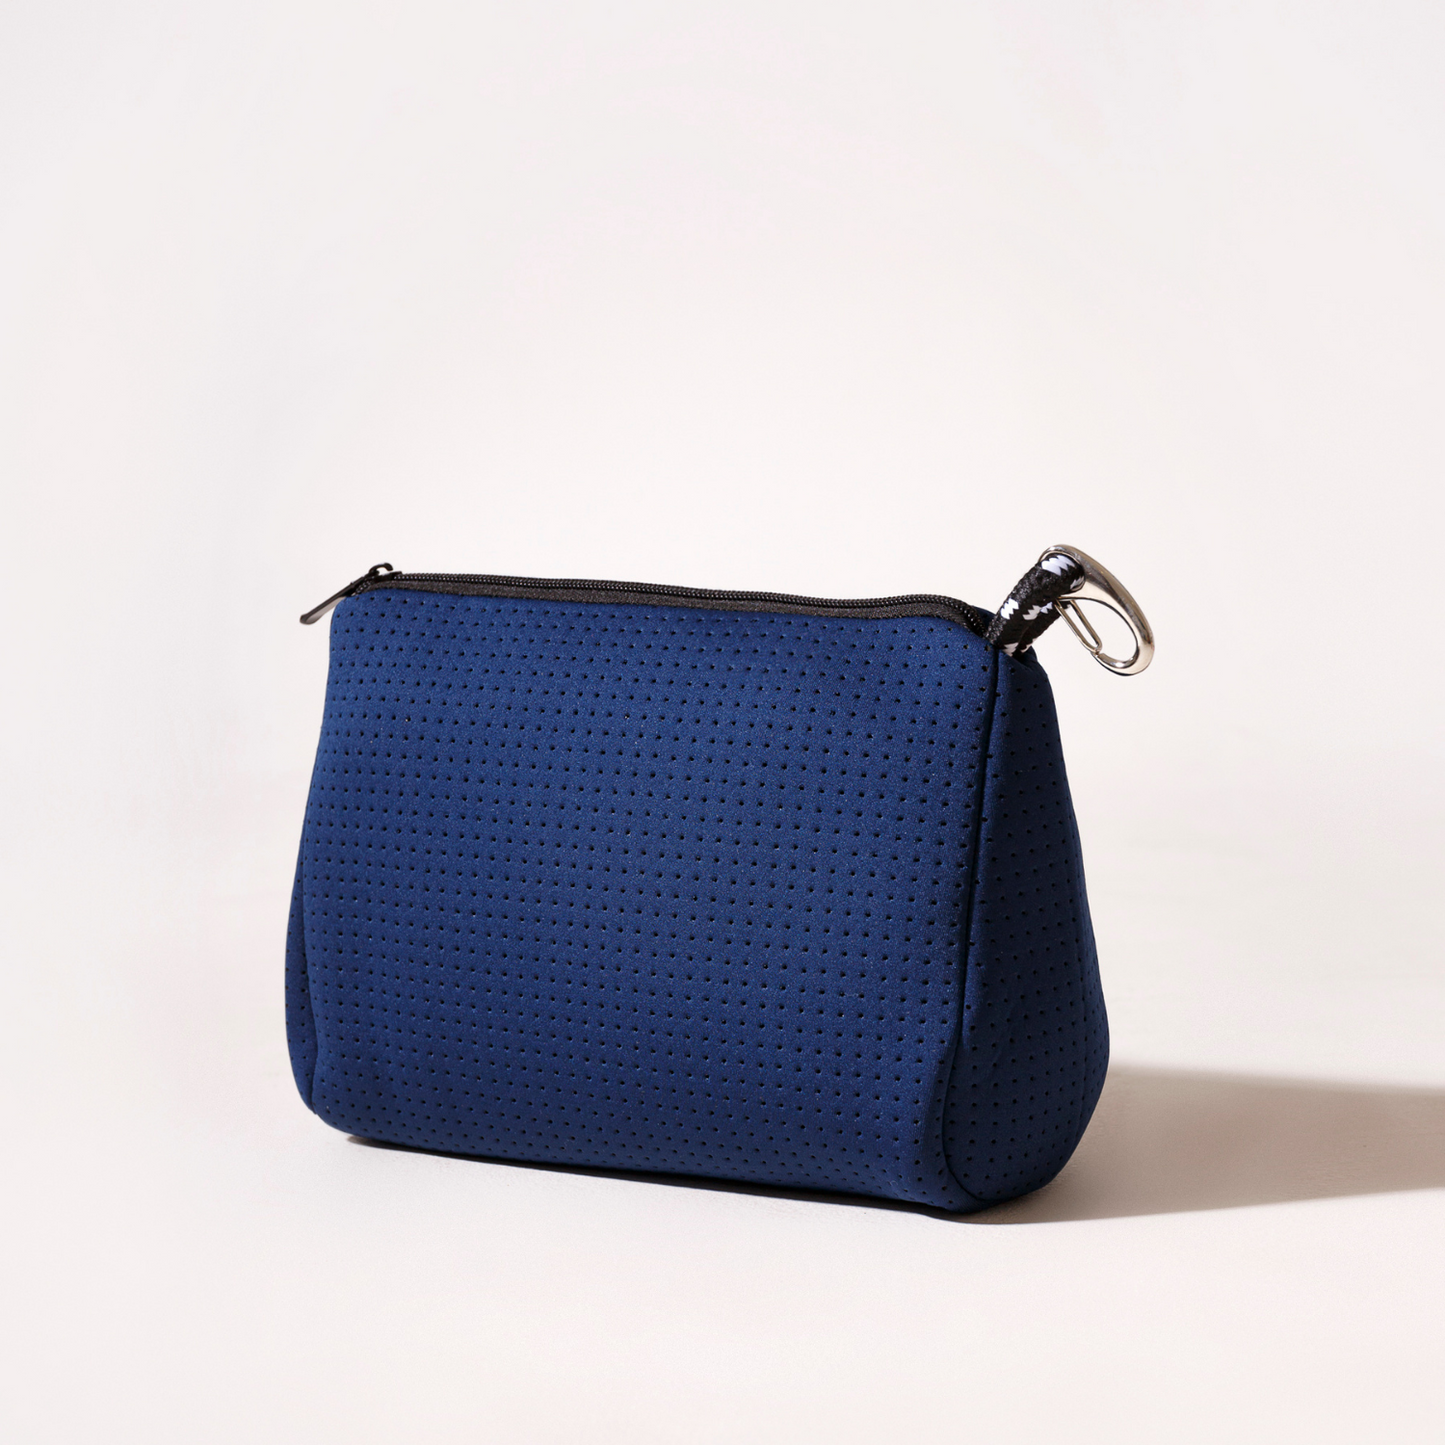 ICON TOTE + FLAP CROSSBODY + POUCH - DEEP BLUE